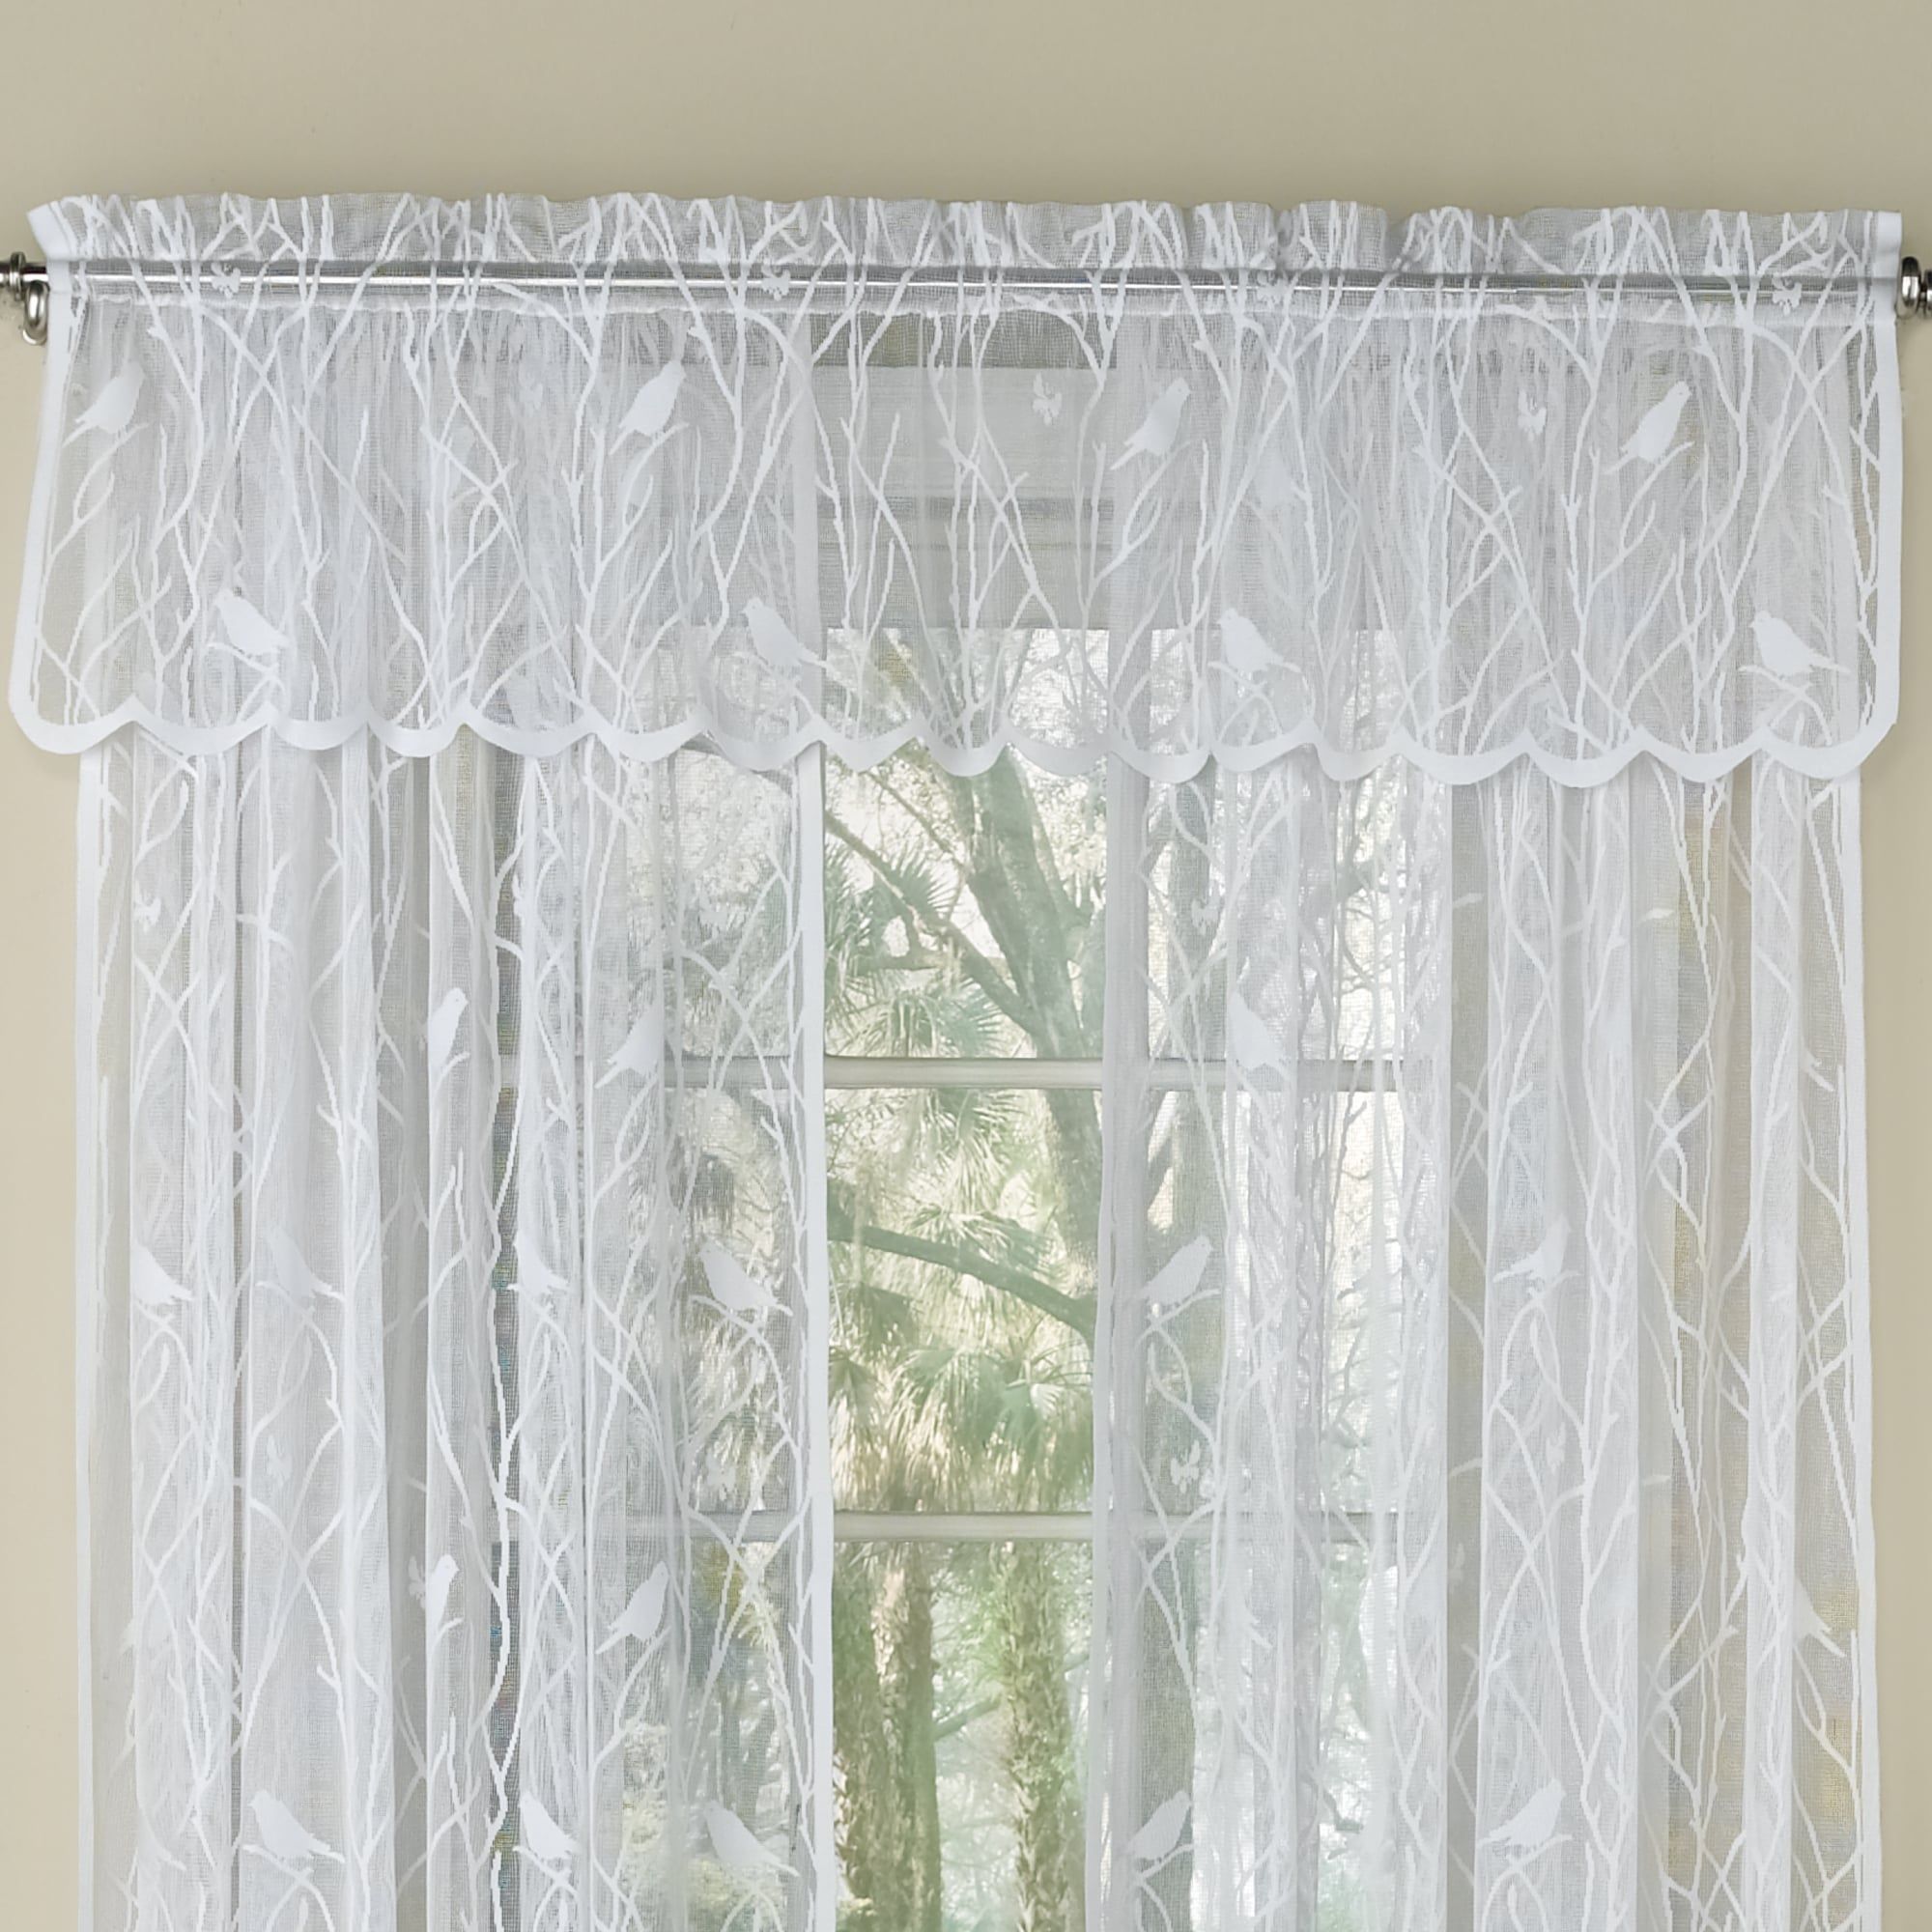 Sweet Home Collection White Knit Lace Bird Motif Window Curtain Tiers,  Valance And Swag Pair Options Throughout White Knit Lace Bird Motif Window Curtain Tiers (View 3 of 20)